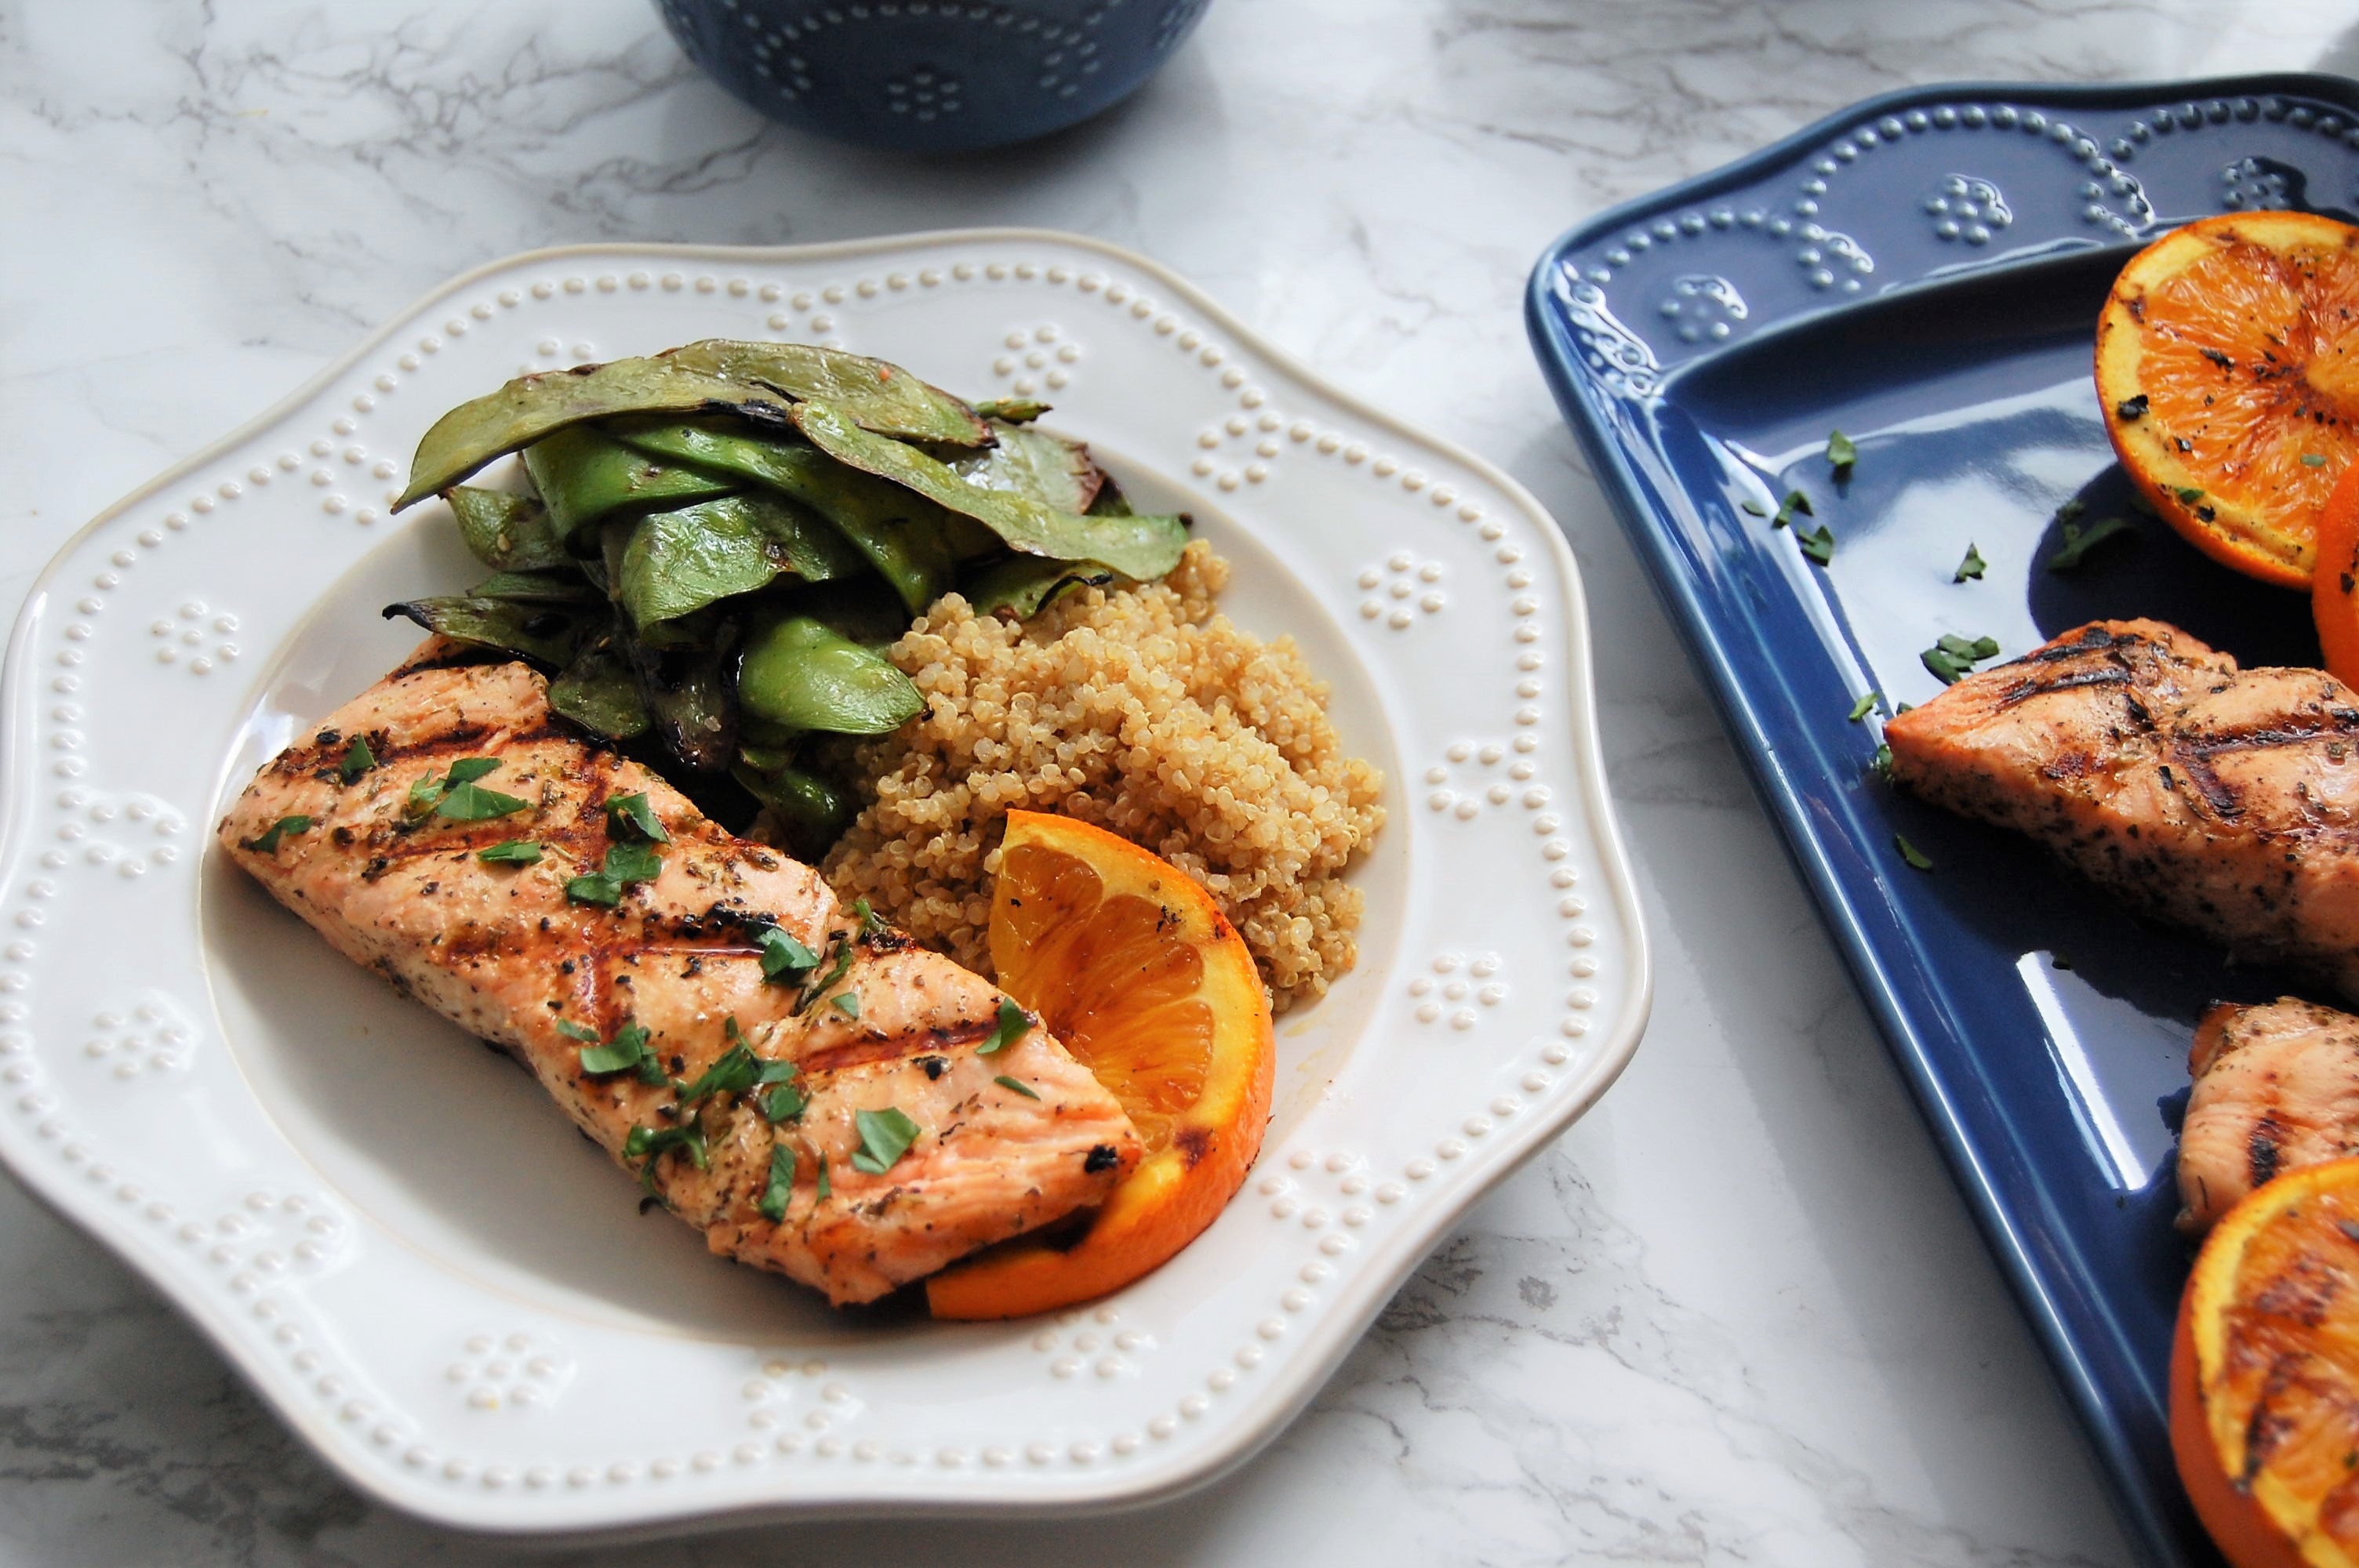 Grilling salmon has never been easier with this four ingredient orange herb marinade. Get the recipe for this healthy, delicious, summer meal at @nutritiontofit.